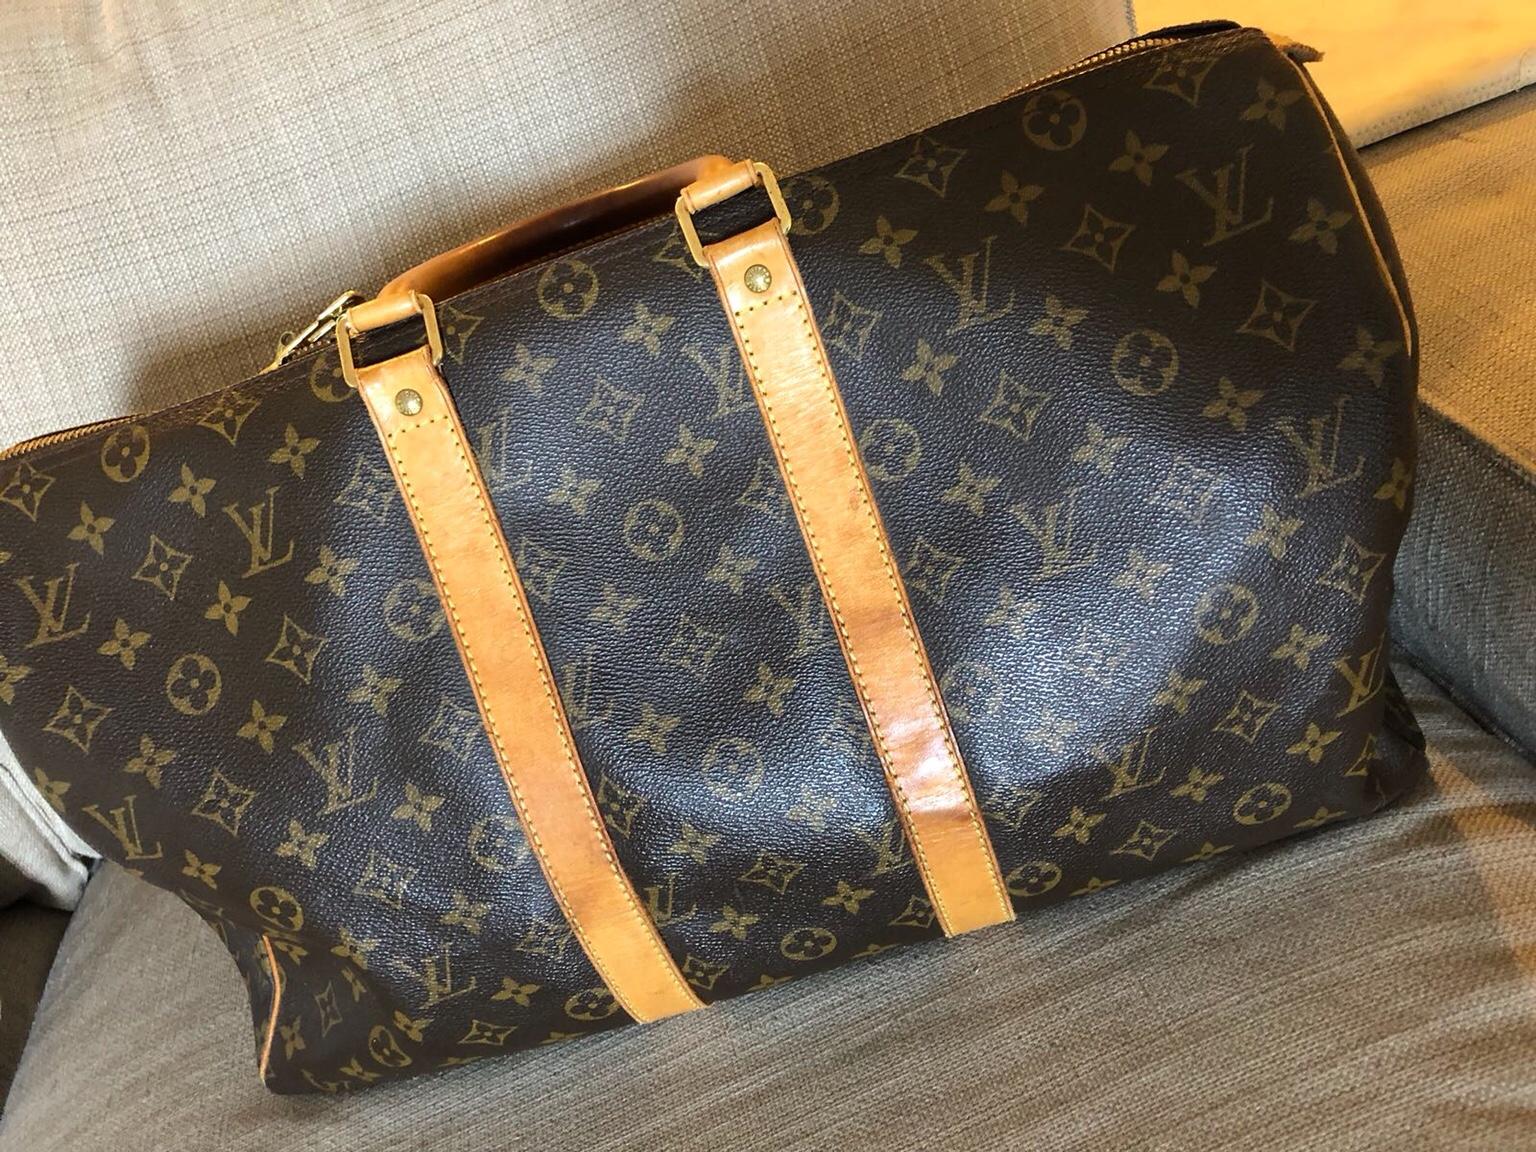 Louis Vuitton Travel Bag gym bag weekend bag in AB24 Aberdeen for £550.00 for sale - Shpock